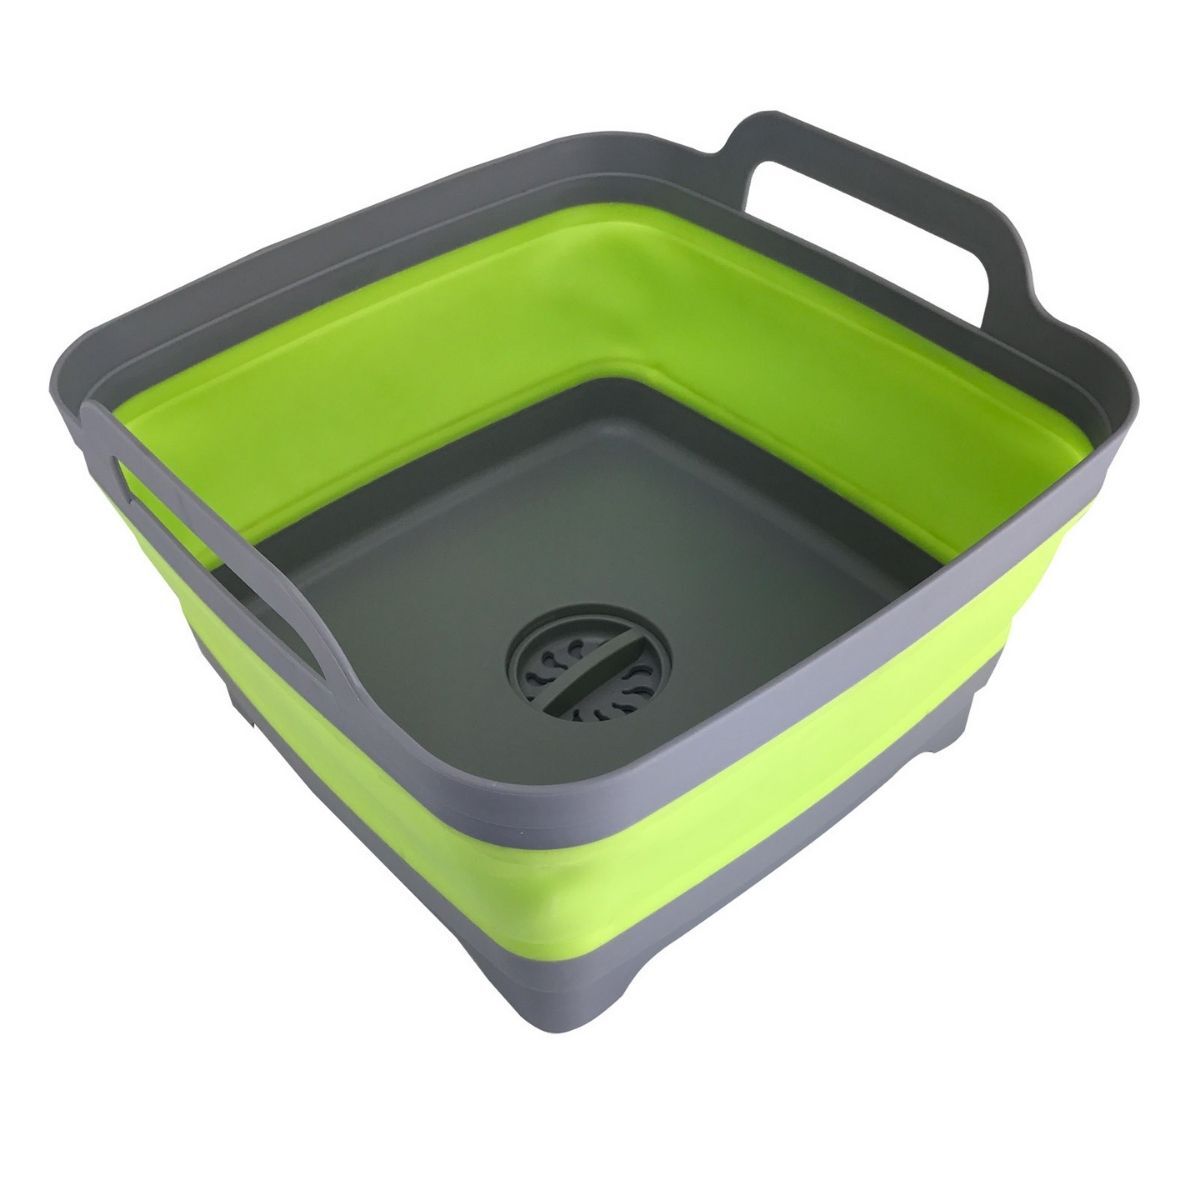 Collapsible Green Silicone Caravan Camping Wash Tub Sink With Drain Food Grade Autobox